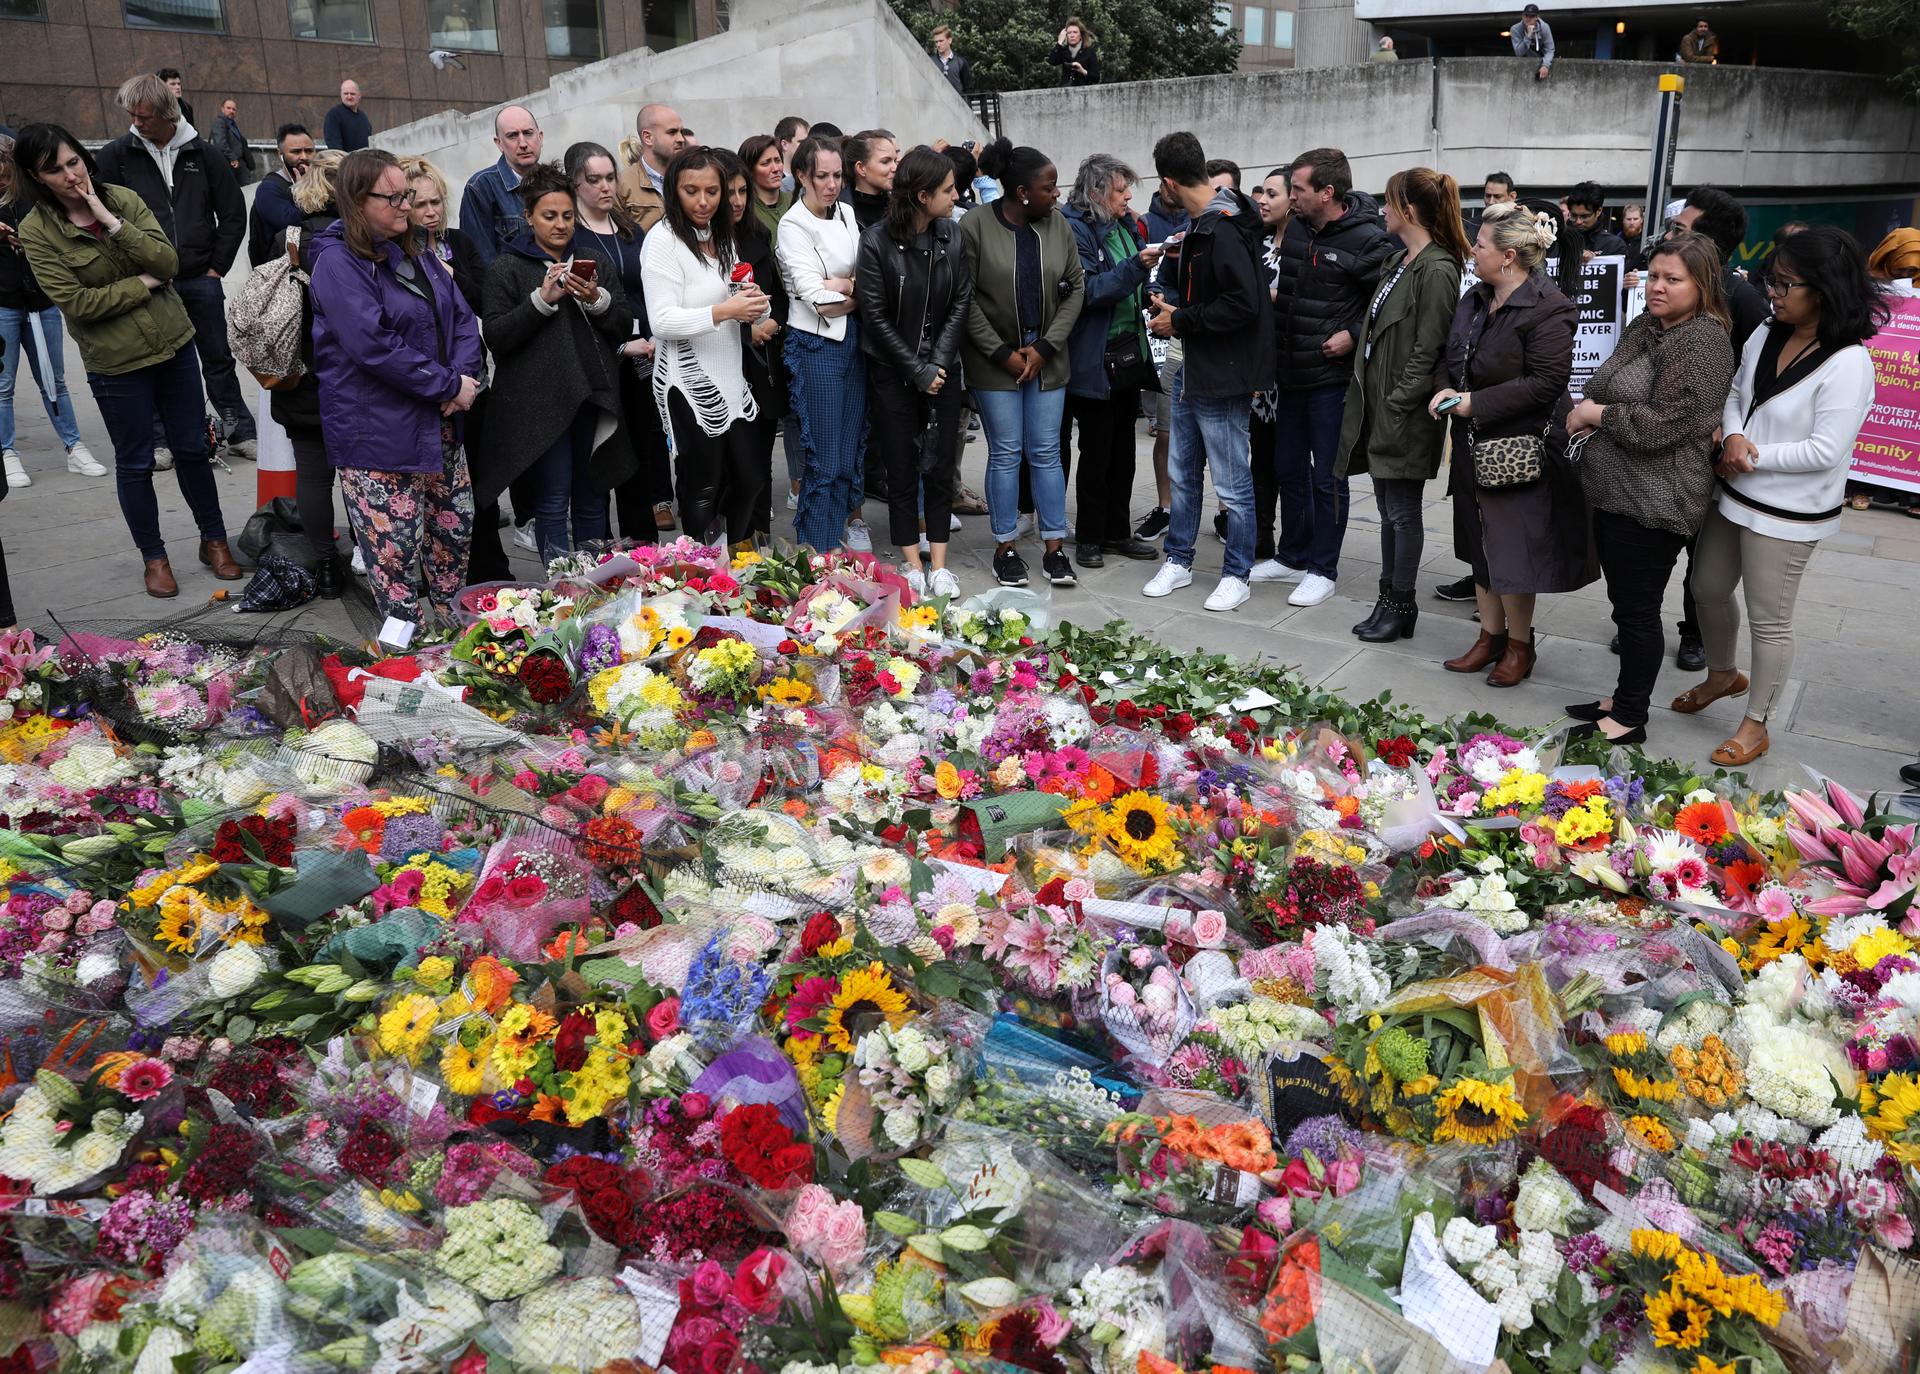 People look at floral tributes for the victims of the attack on London Bridge and Borough Market near the scene of the attack, London, June 6, 2017.